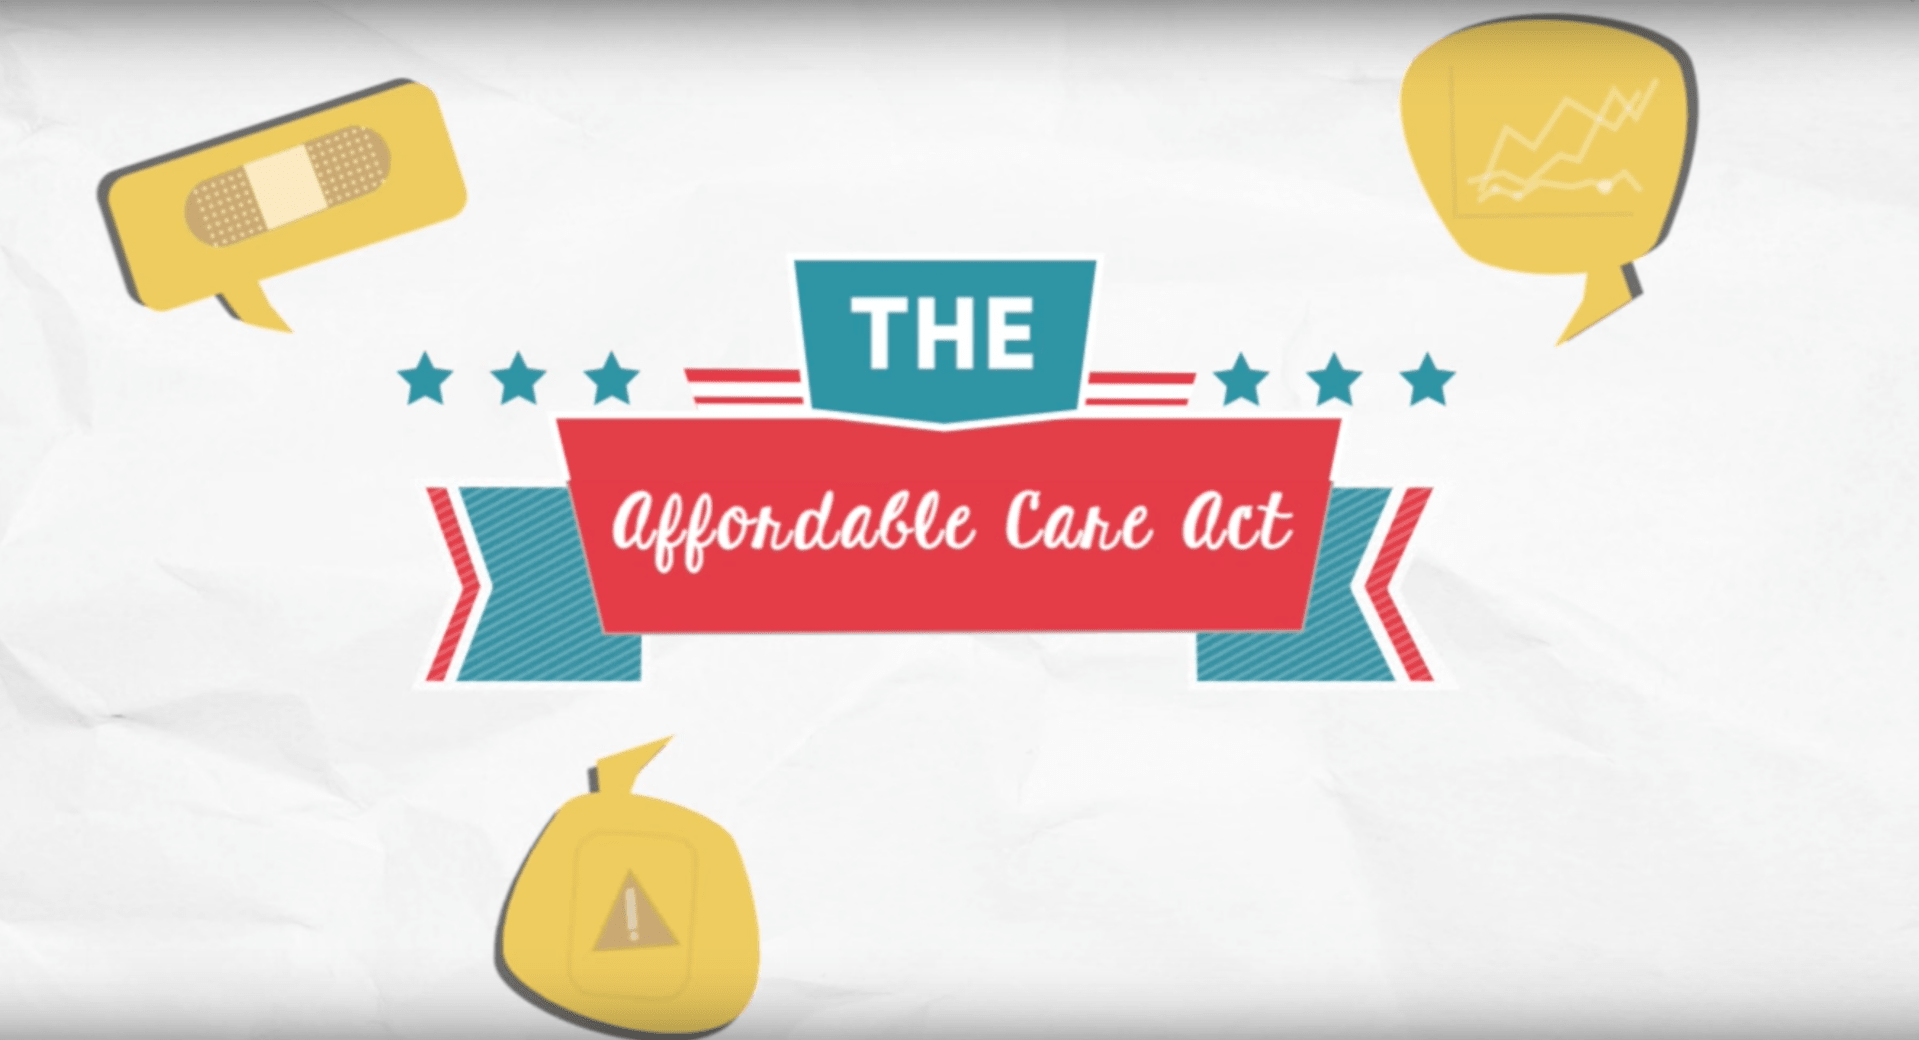 5 Common Misconceptions About the ACA